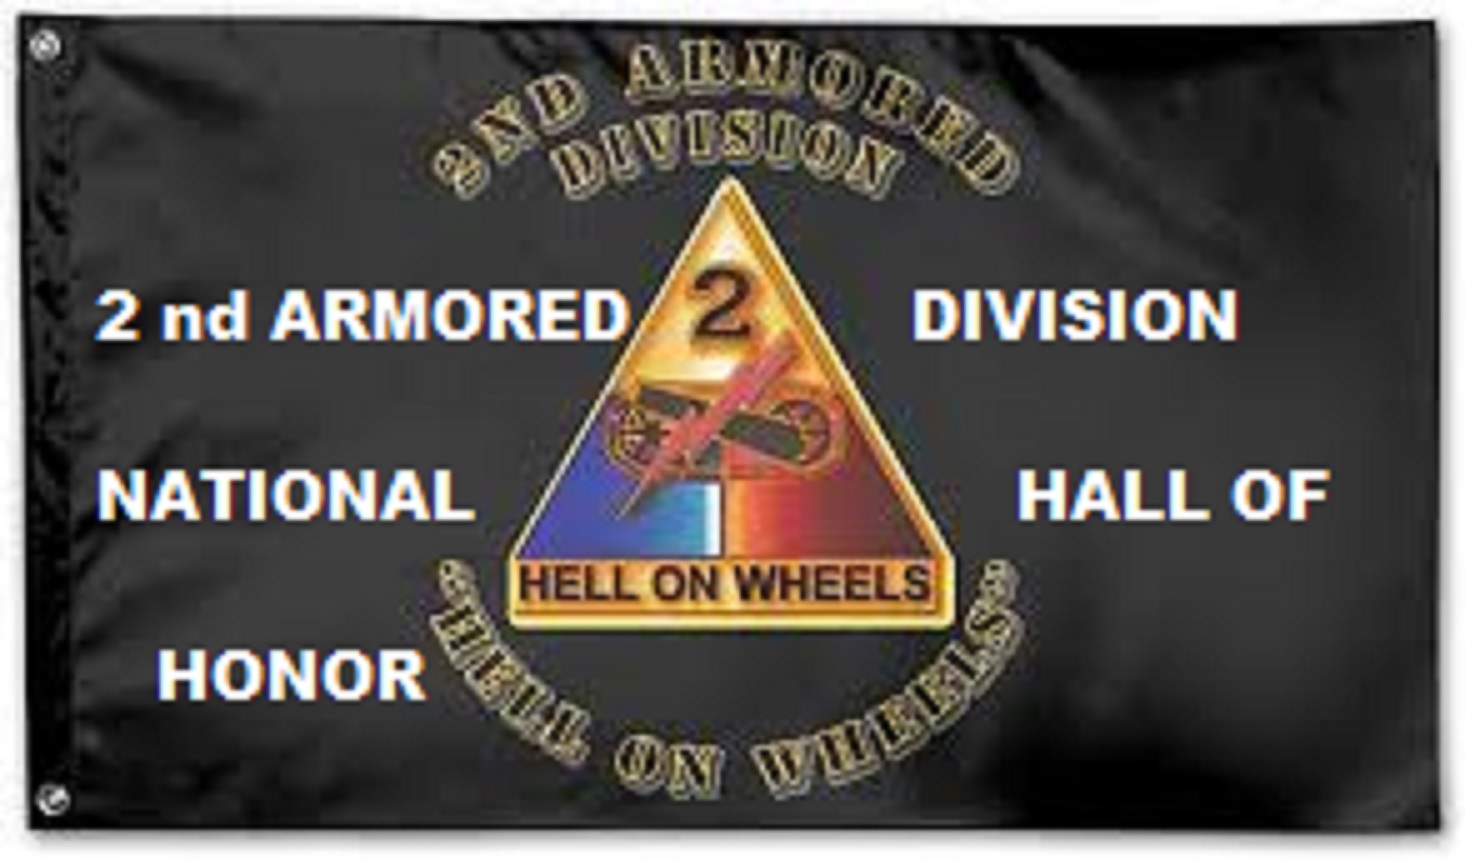 2nd ARMORED DIVISION  NATIONL HALL OF HONOR